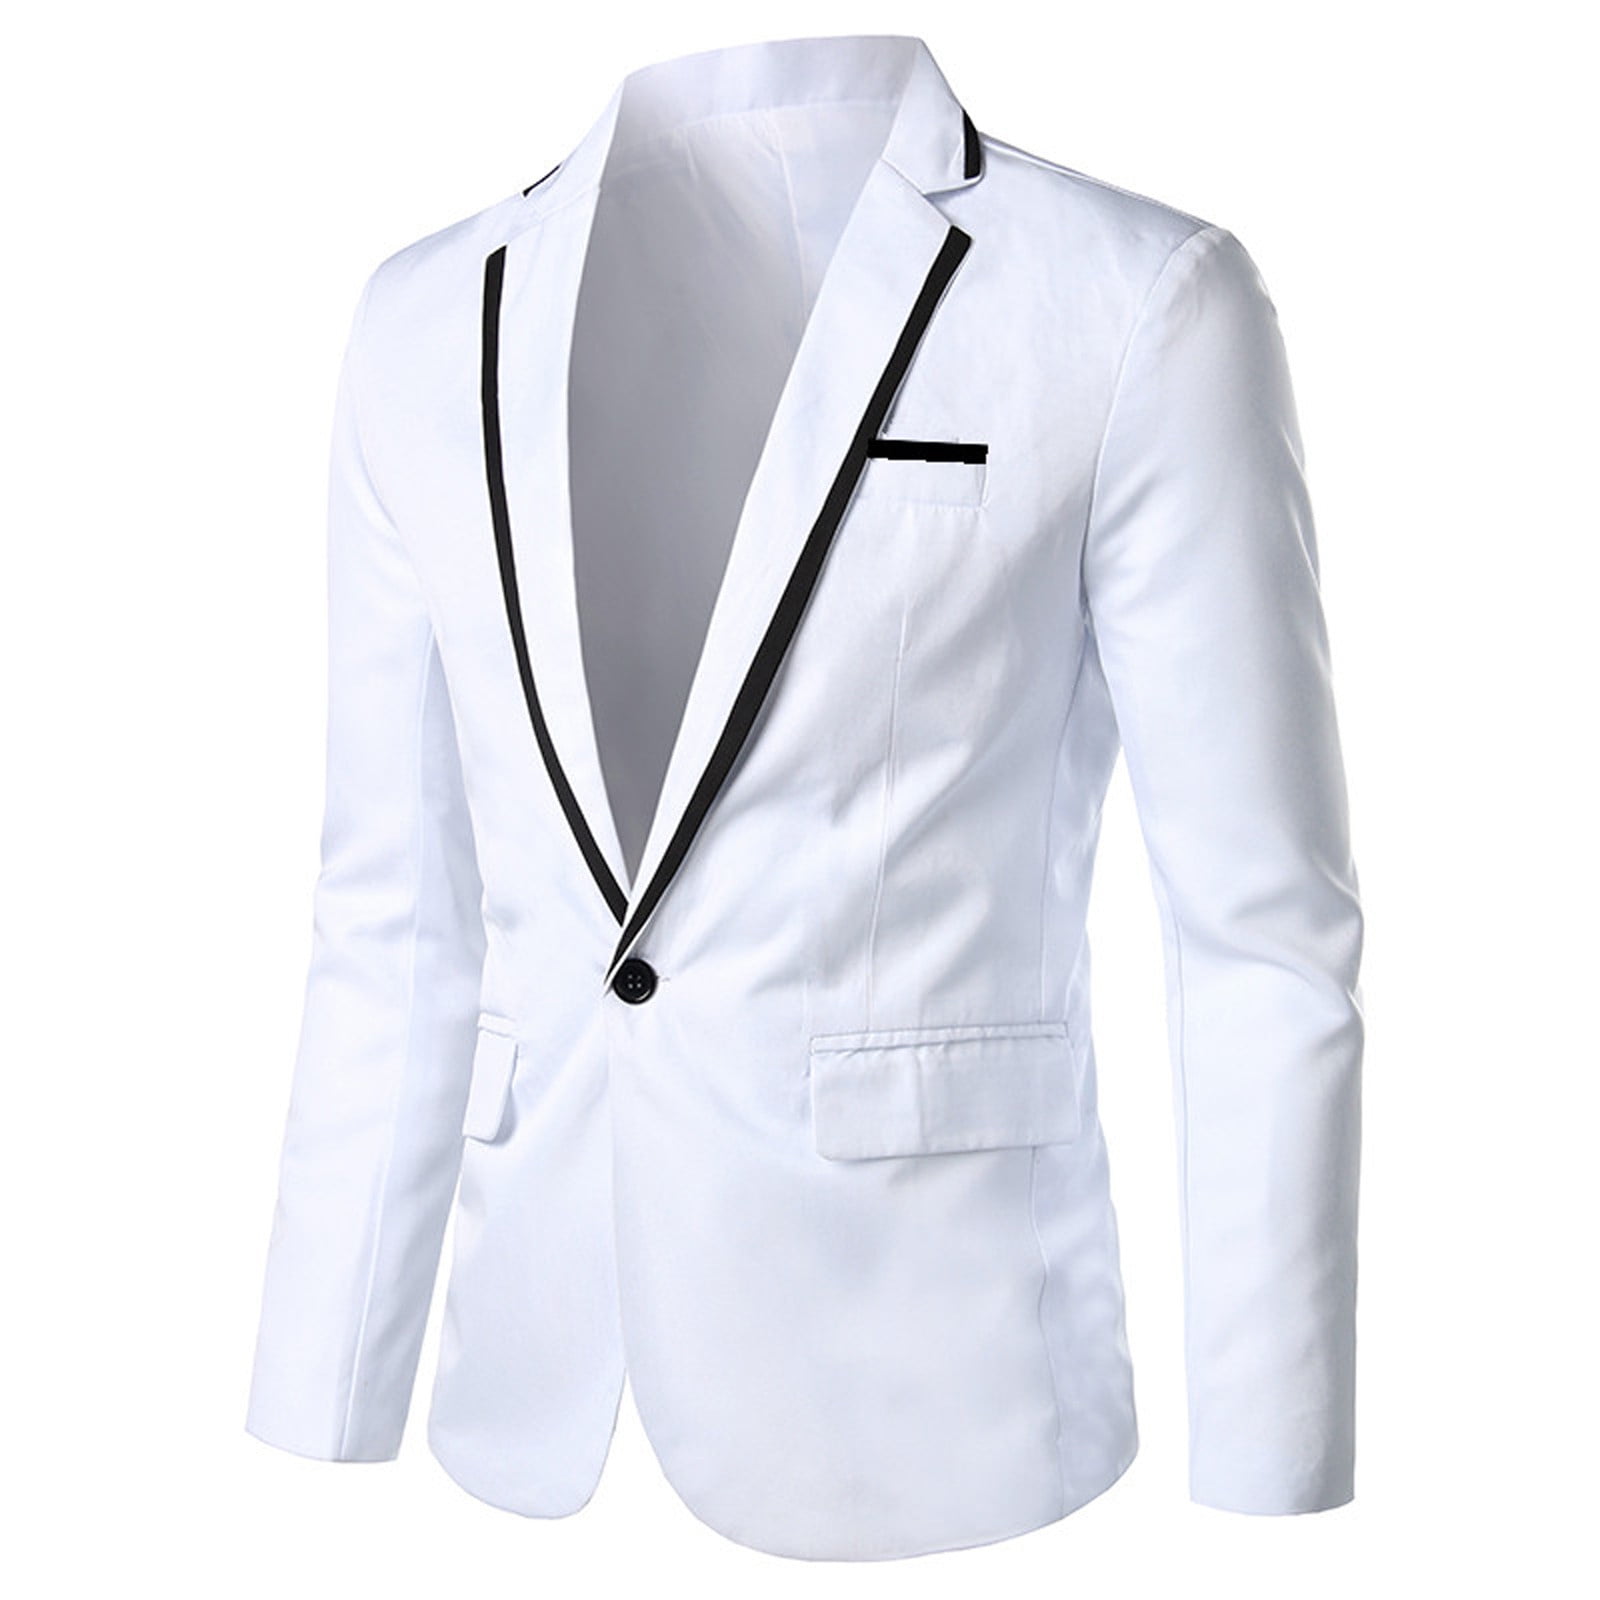 QIPOPIQ Clearance Men's Suits Solid Casual Slim Single-row One-button Coat  Mens Formal Blazer Suit Jacket 